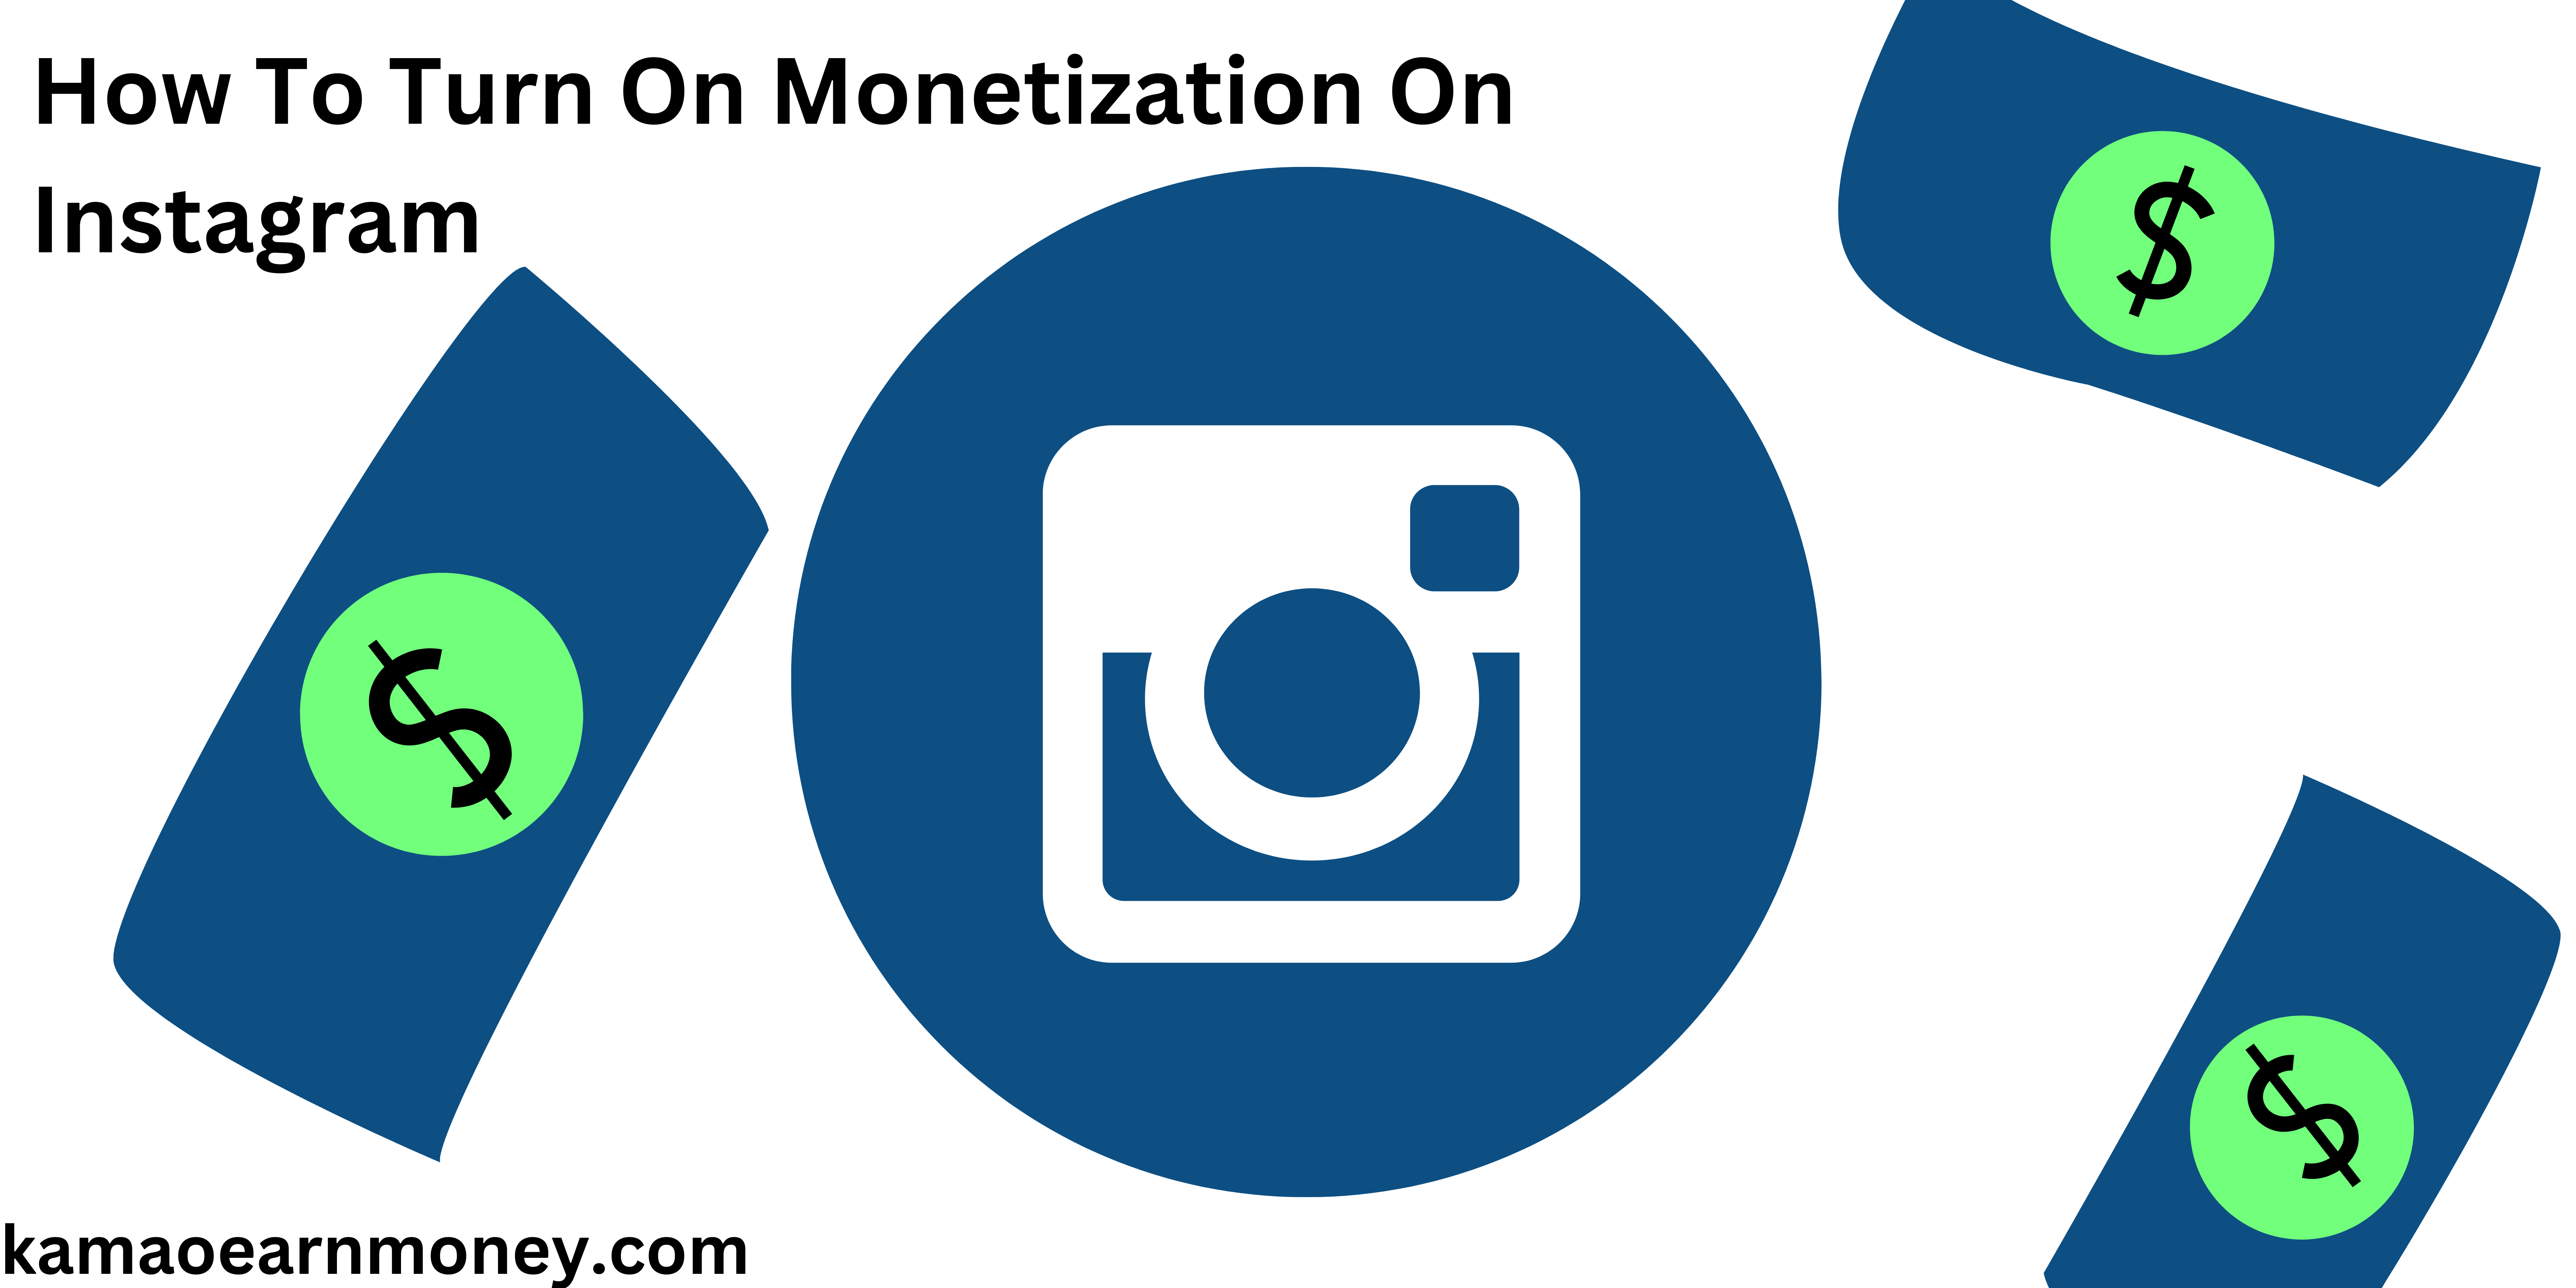 How to Turn On Monetization On Instagram